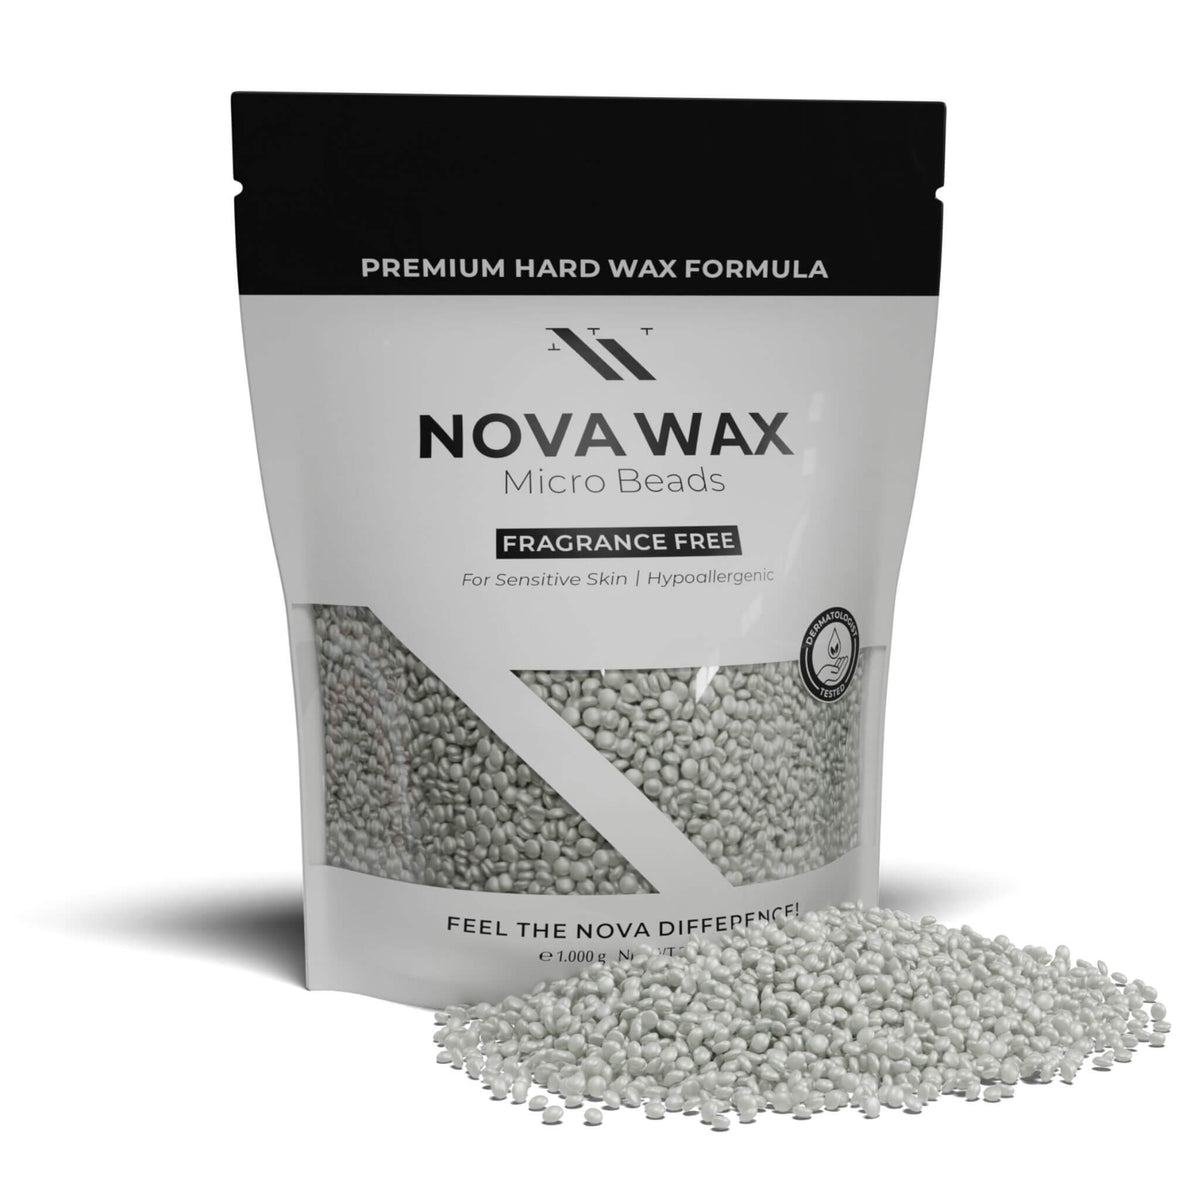 The Best Hard Wax and Soft Wax for Professional Estheticians